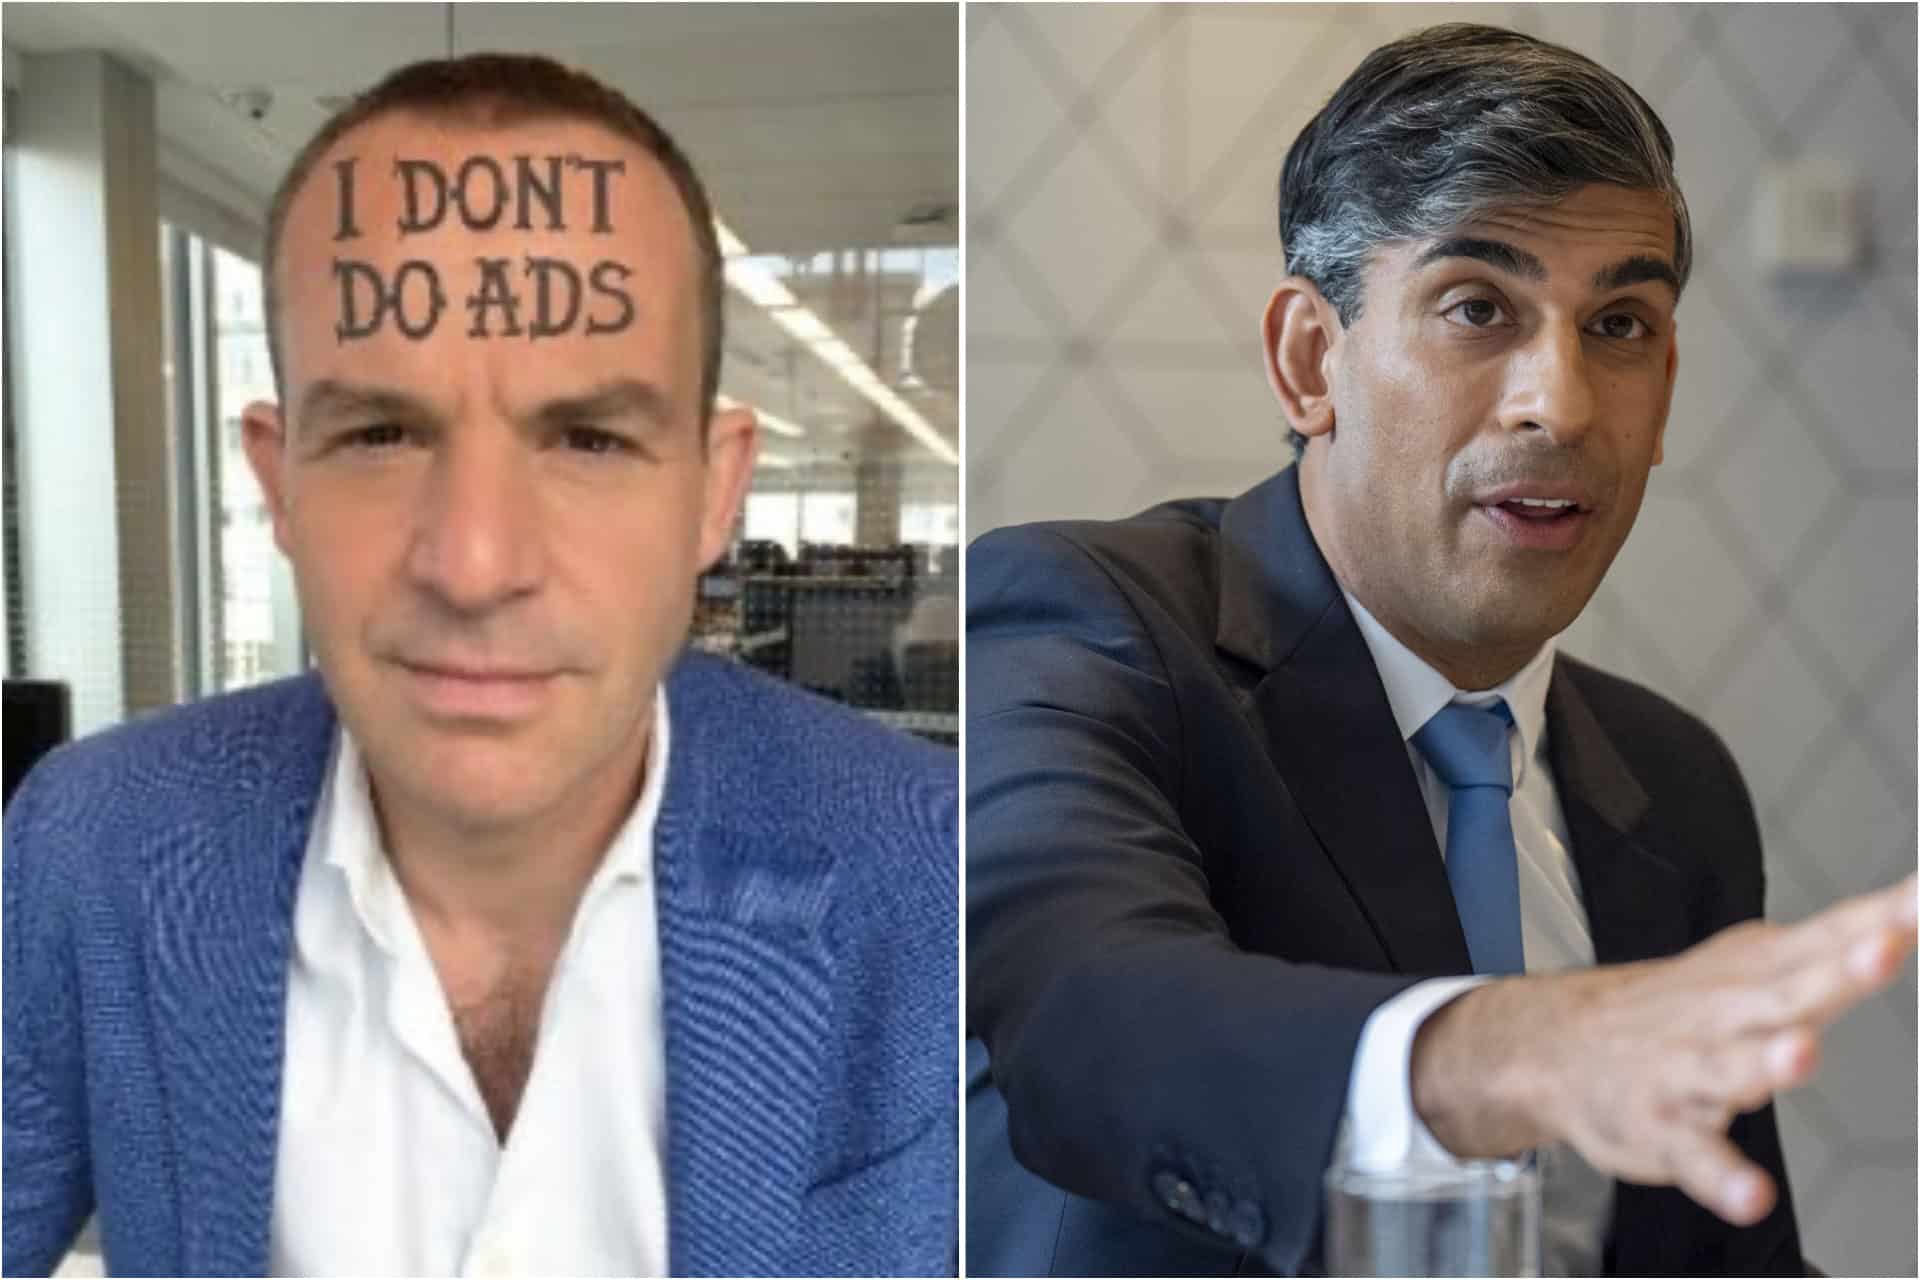 Martin Lewis slams Tories for using him in ad targeting Labour tax plans